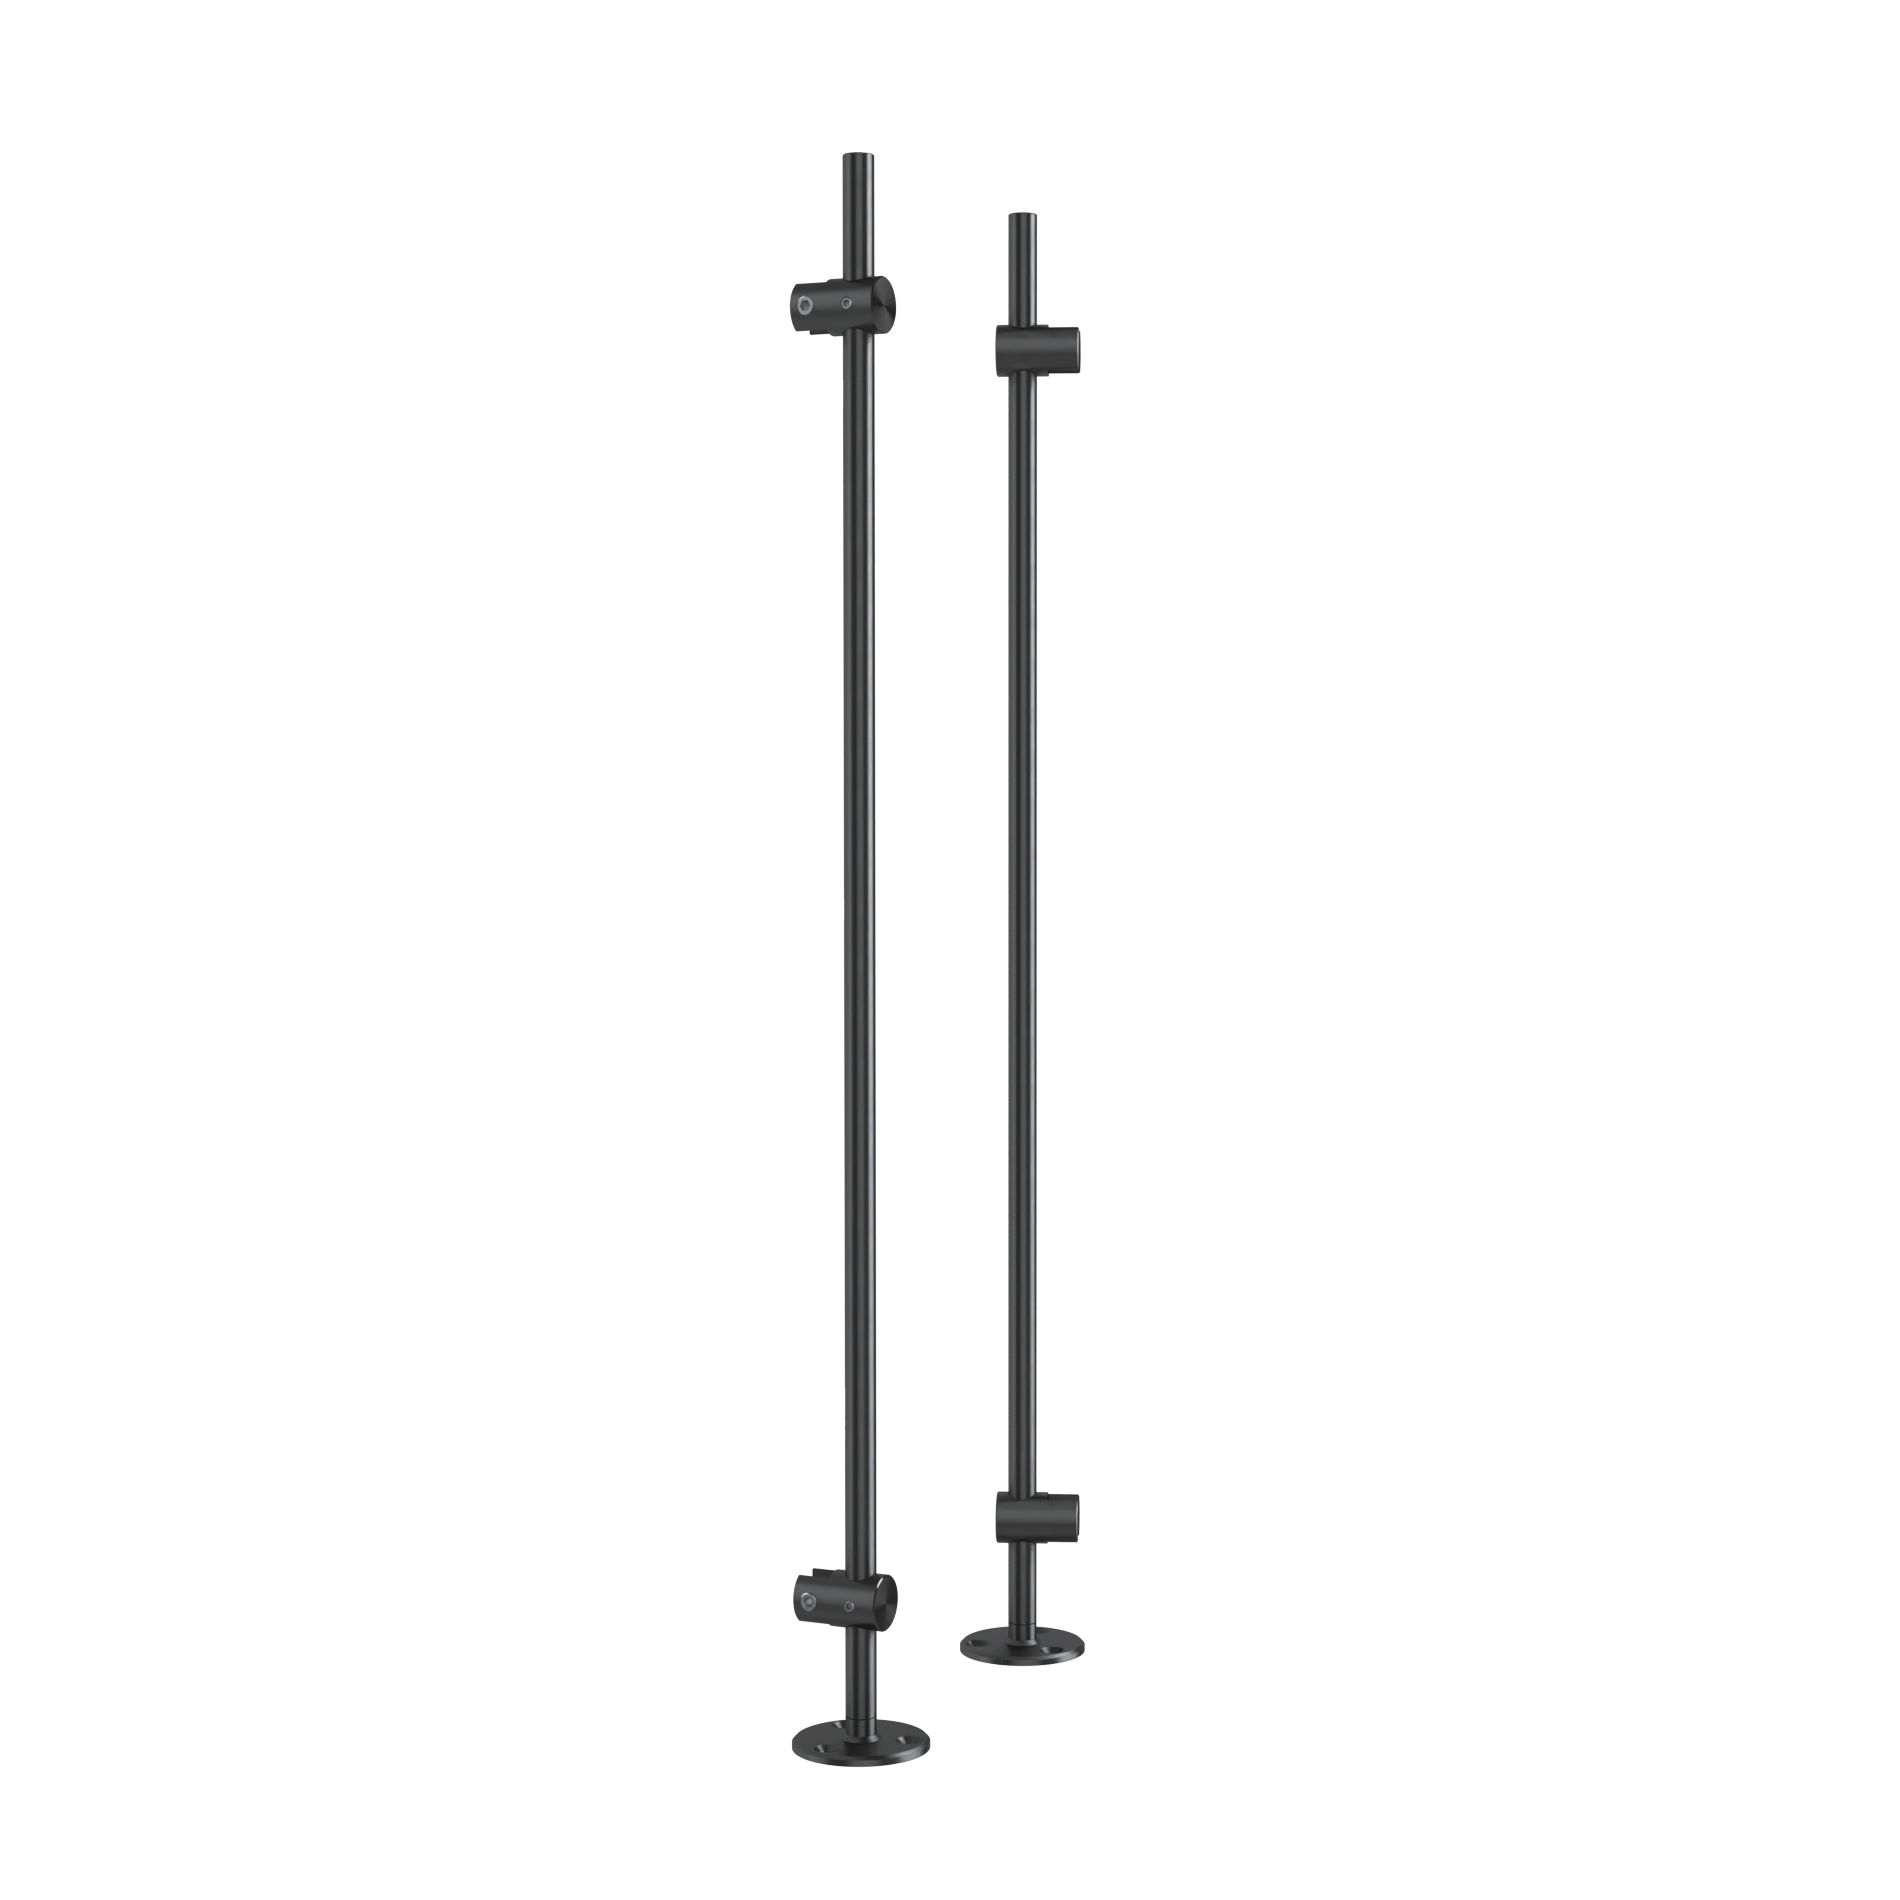 Set of 2, 3/8’’ Diameter Rod Projecting Mount, Stainless Steel Satin Brushed Finish, 20'' Long w/ 3 Holes Mounting Plate, to be installed with screws (Included) or double sided tape (not included). Hold up to 5/16'' material thickness.